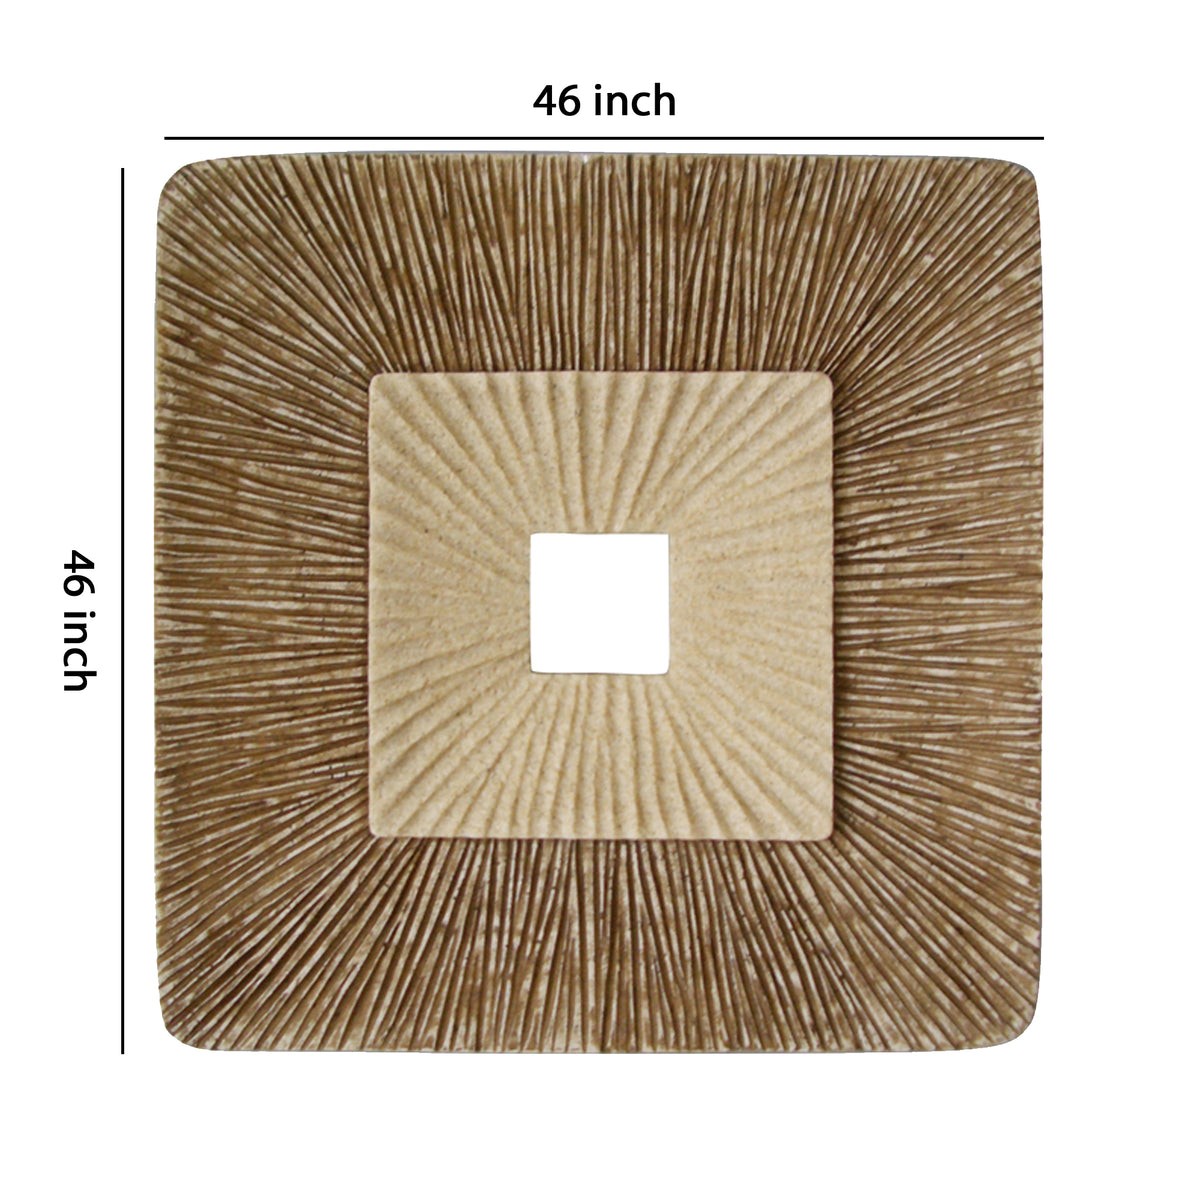 Square Sandstone Wall Decor with Ribbed Details, Small, Brown and Beige - BM205836